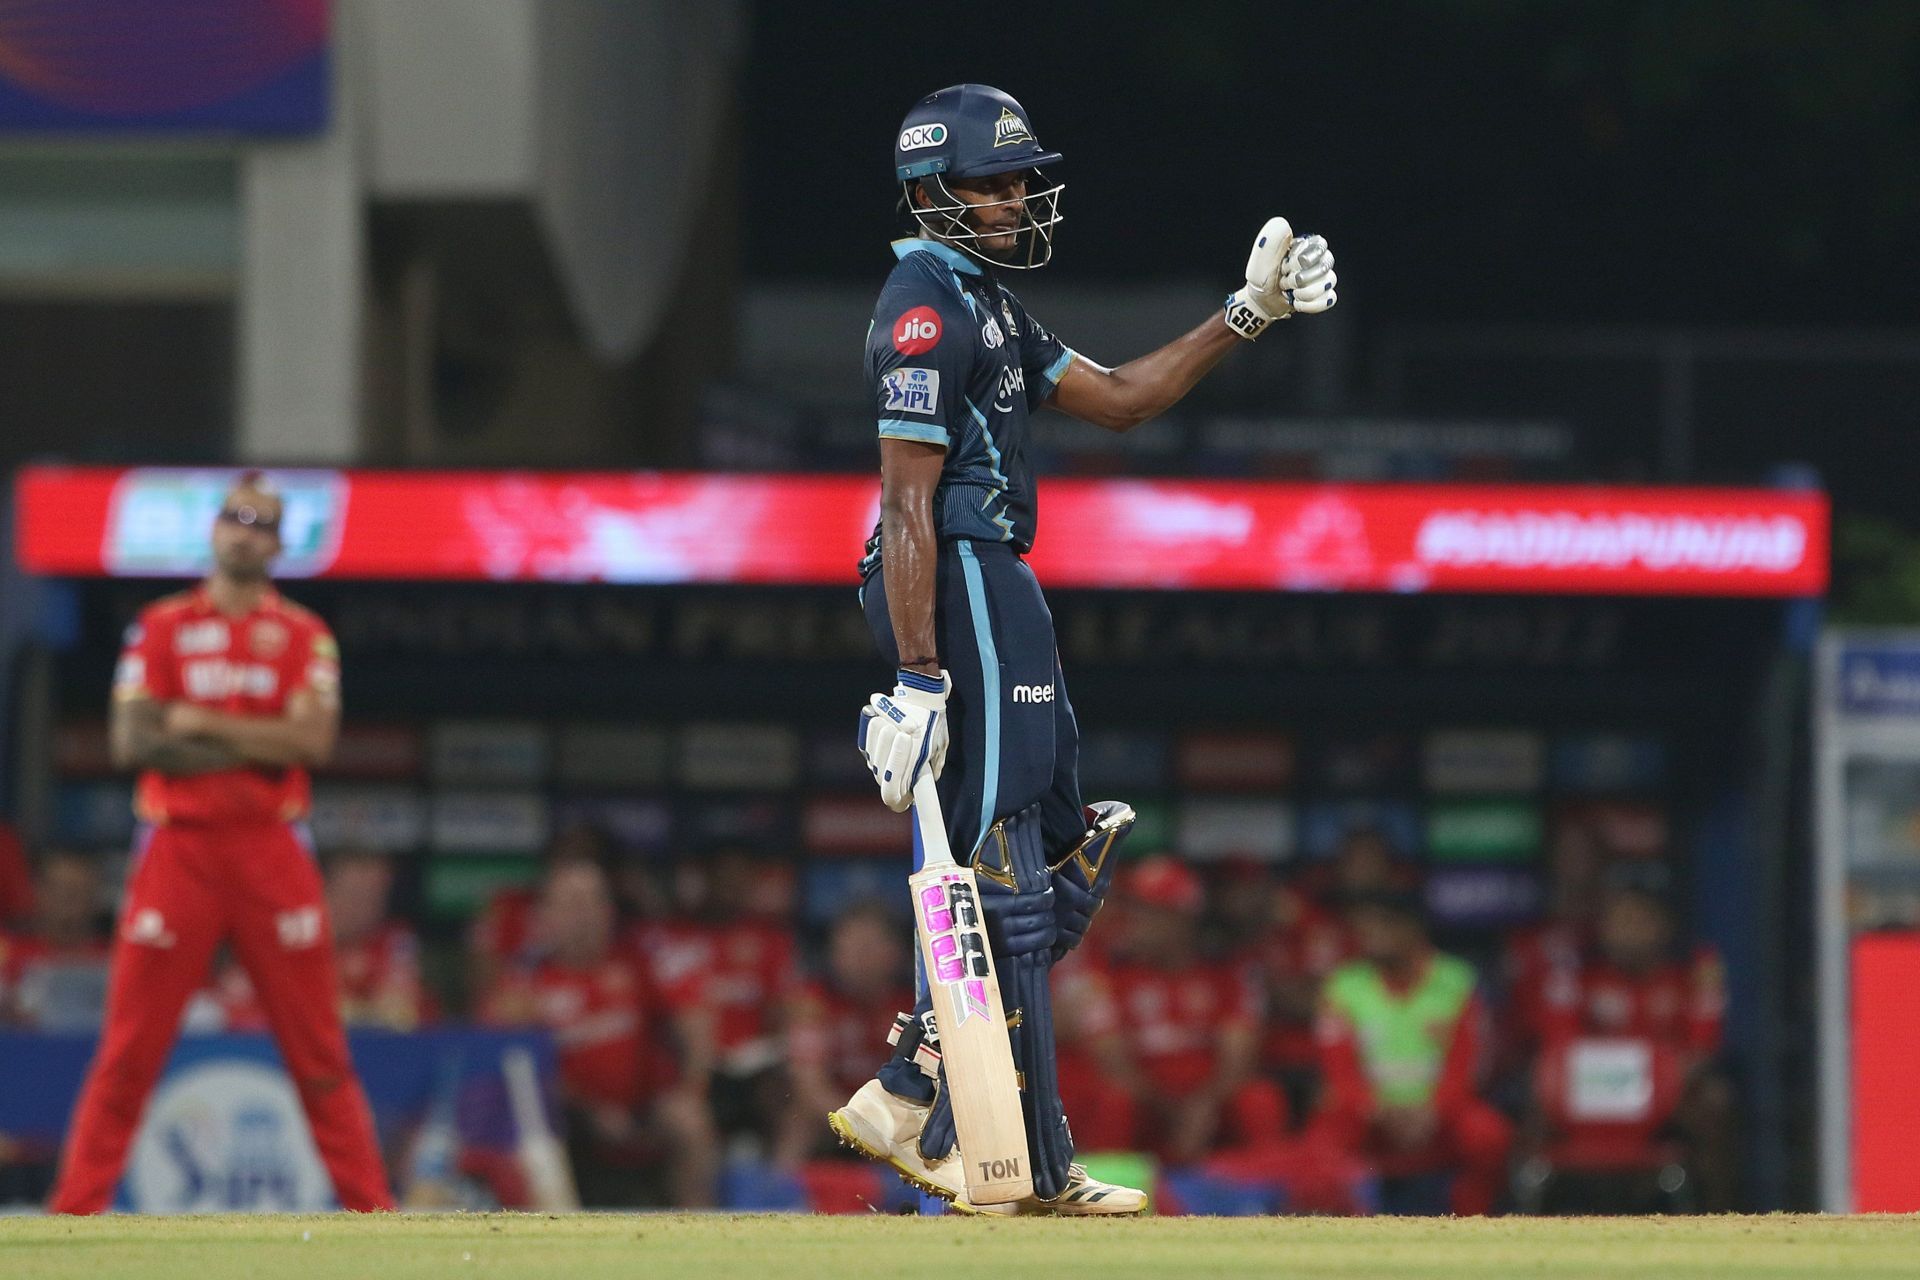 Celebrations were muted as Sai Sudharsan kept the Titans&#039; innings afloat